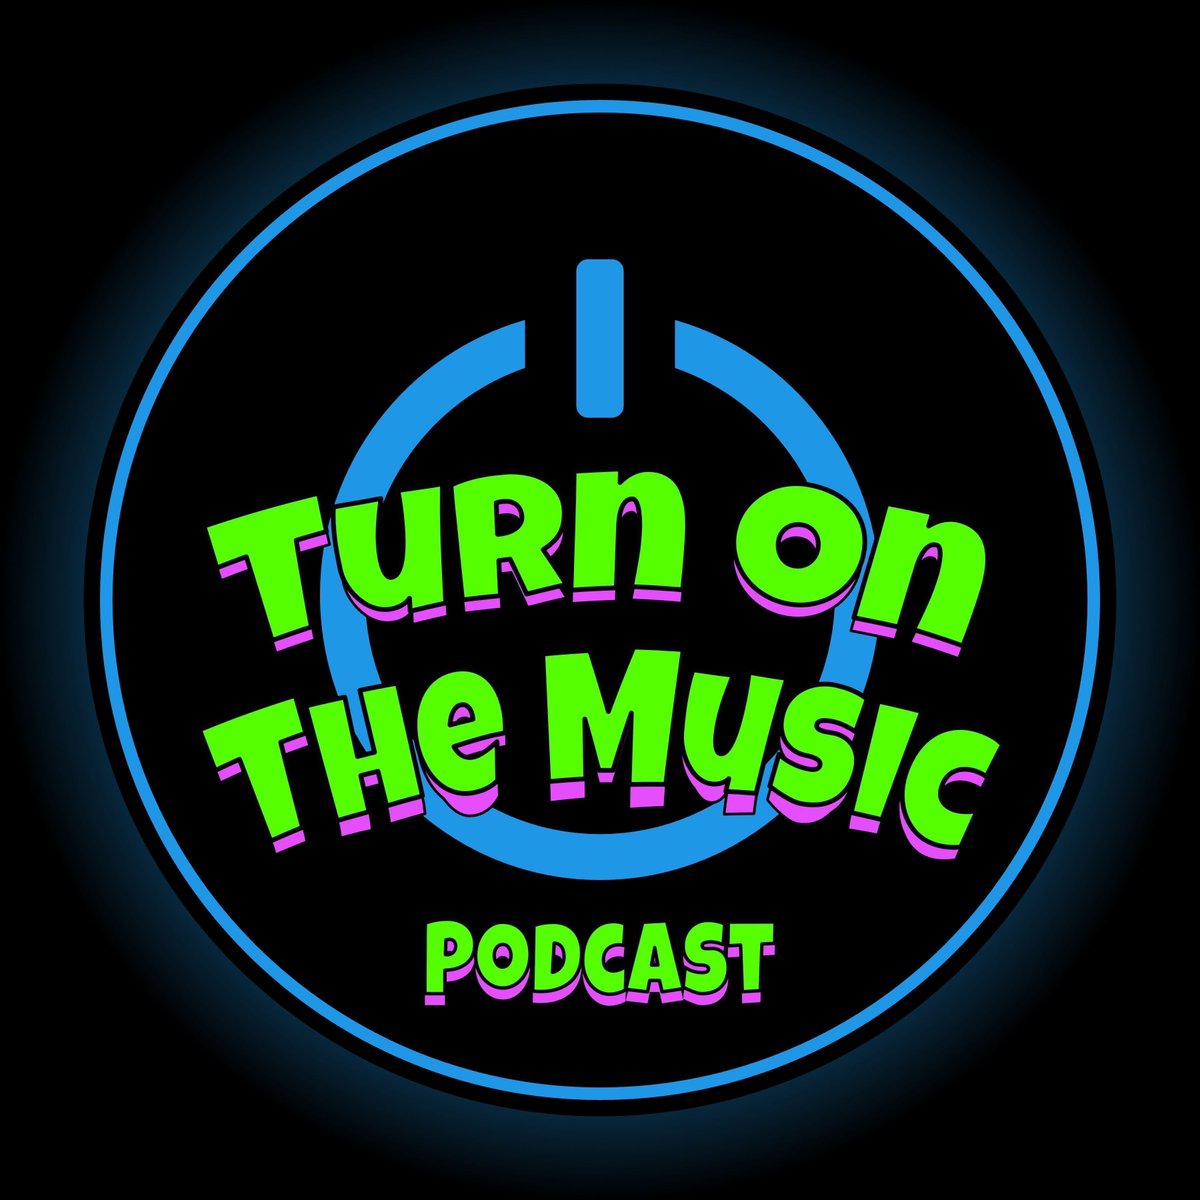 Yesterday, Episode 4 of Season 3 came out. Kyle & CJ talk about Hiromi. An amazing pianist and composer! Did you listen to it yet? Click the link and check it out! #sharethemusic #music #conversations #turnonthemusic #podcast buff.ly/3XdYTxH